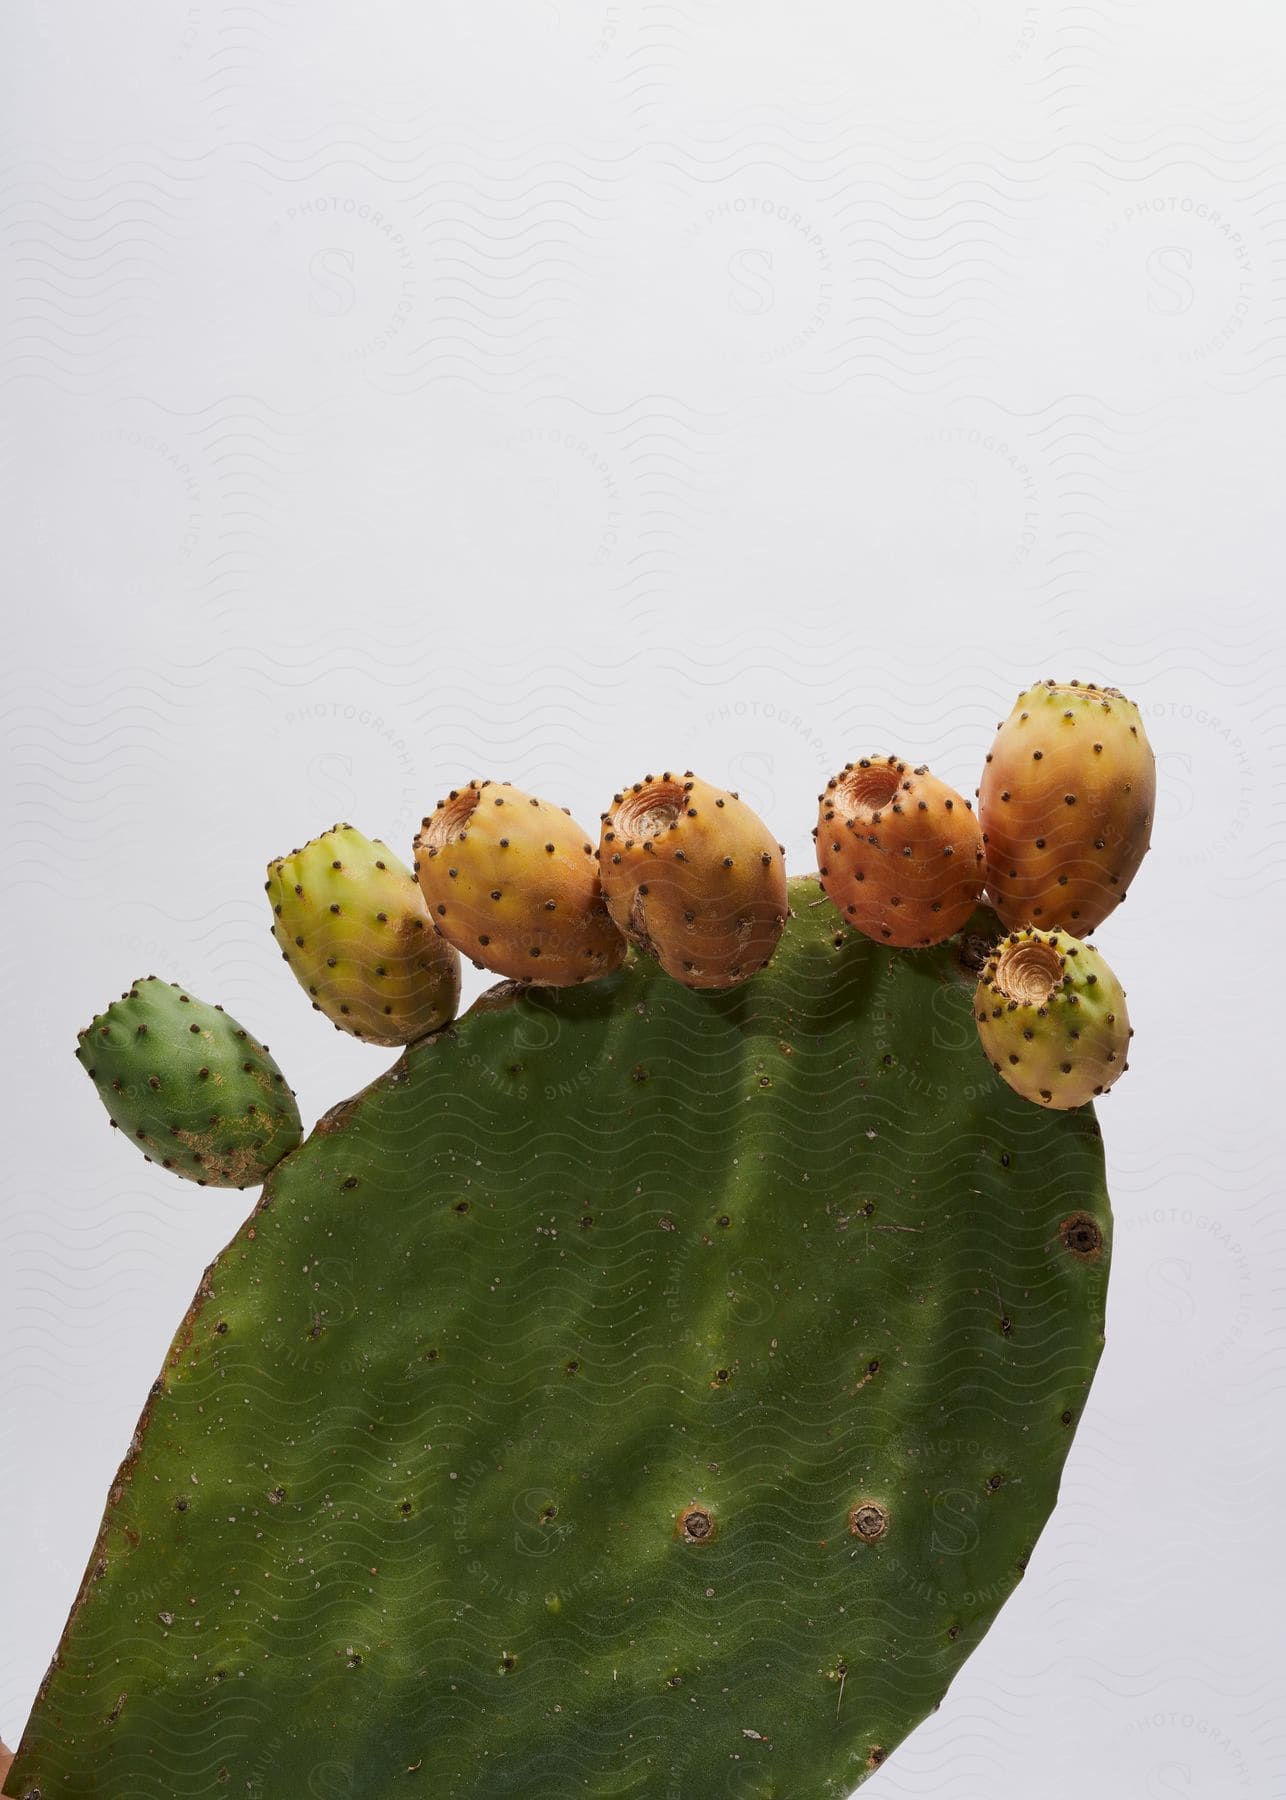 Close-up of a green cactus with several yellow-orange prickly pears on a light background.